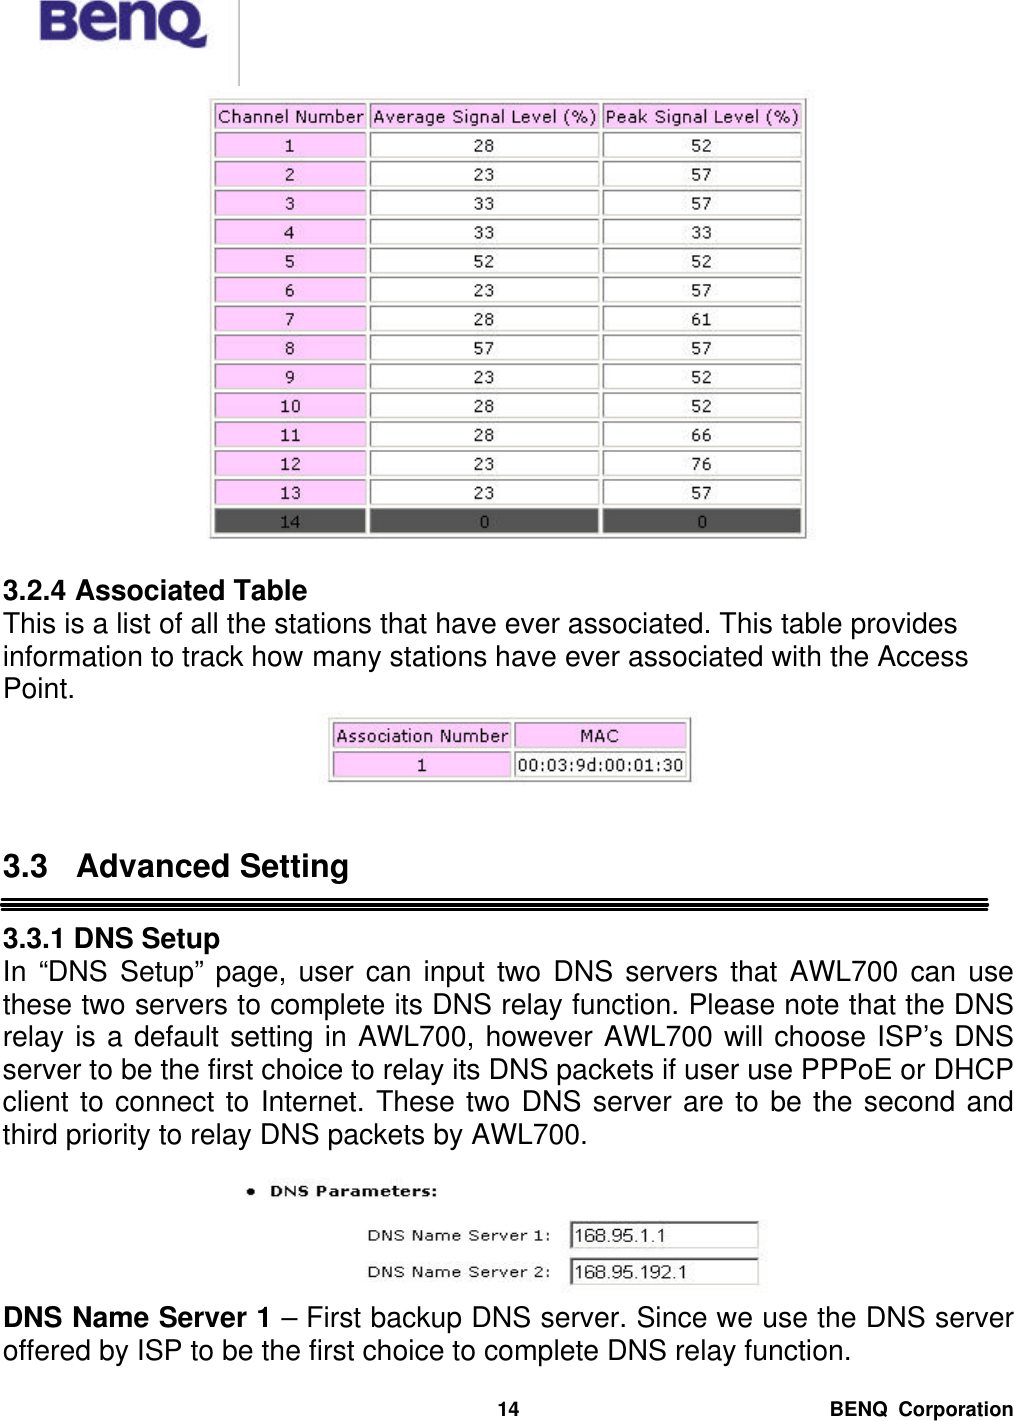  BENQ Corporation 14    3.2.4 Associated Table This is a list of all the stations that have ever associated. This table provides information to track how many stations have ever associated with the Access Point.    3.3 Advanced Setting  3.3.1 DNS Setup In “DNS Setup” page, user can input two DNS servers that AWL700 can  use these two servers to complete its DNS relay function. Please note that the DNS relay is a default setting in AWL700, however AWL700 will choose ISP’s DNS server to be the first choice to relay its DNS packets if user use PPPoE or DHCP client to connect to Internet. These two DNS server are to be the second and third priority to relay DNS packets by AWL700.   DNS Name Server 1 – First backup DNS server. Since we use the DNS server offered by ISP to be the first choice to complete DNS relay function. 